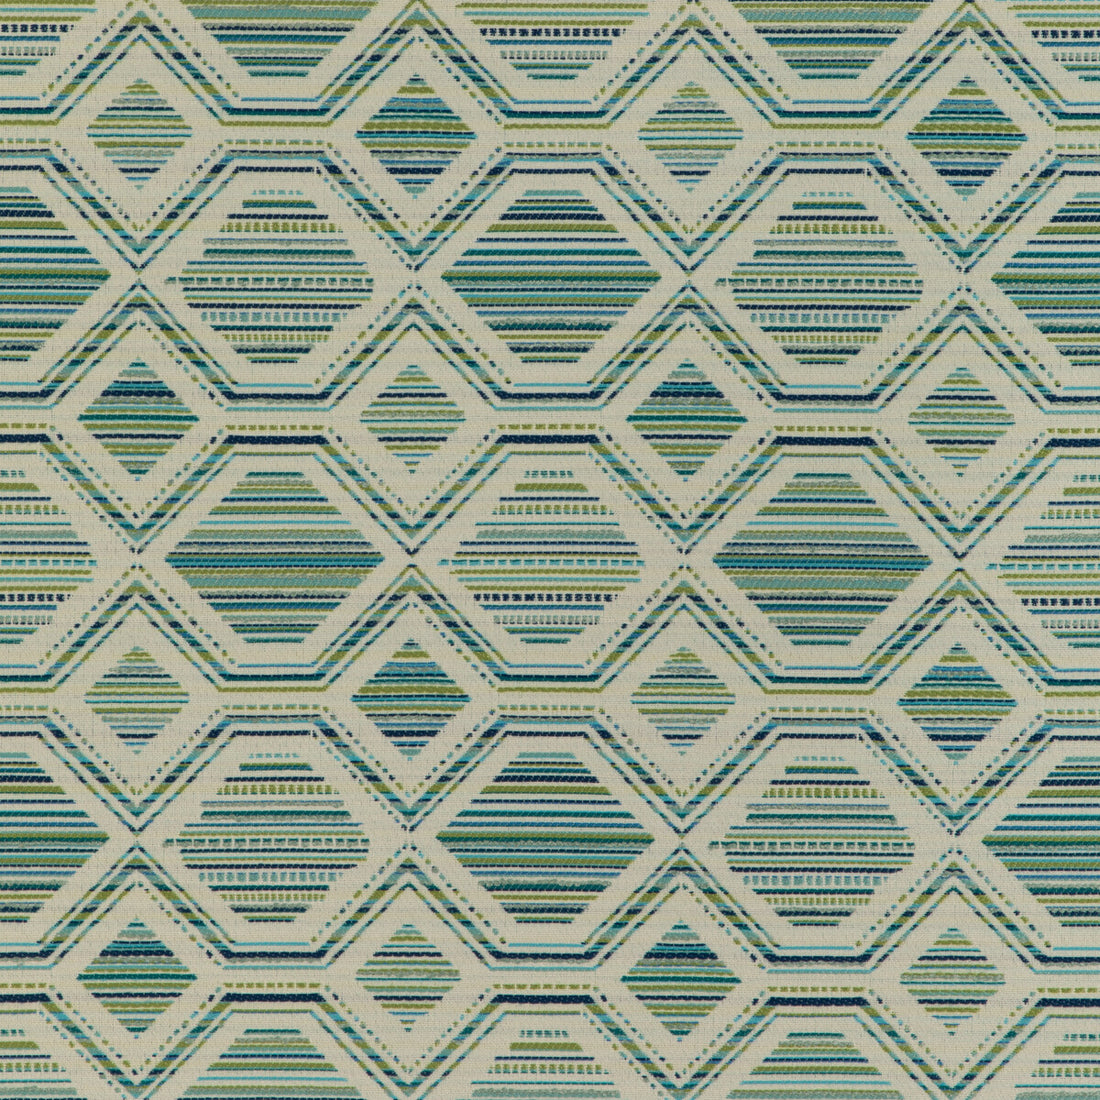 Northport fabric in paradise color - pattern 37073.523.0 - by Kravet Contract in the Chesapeake collection